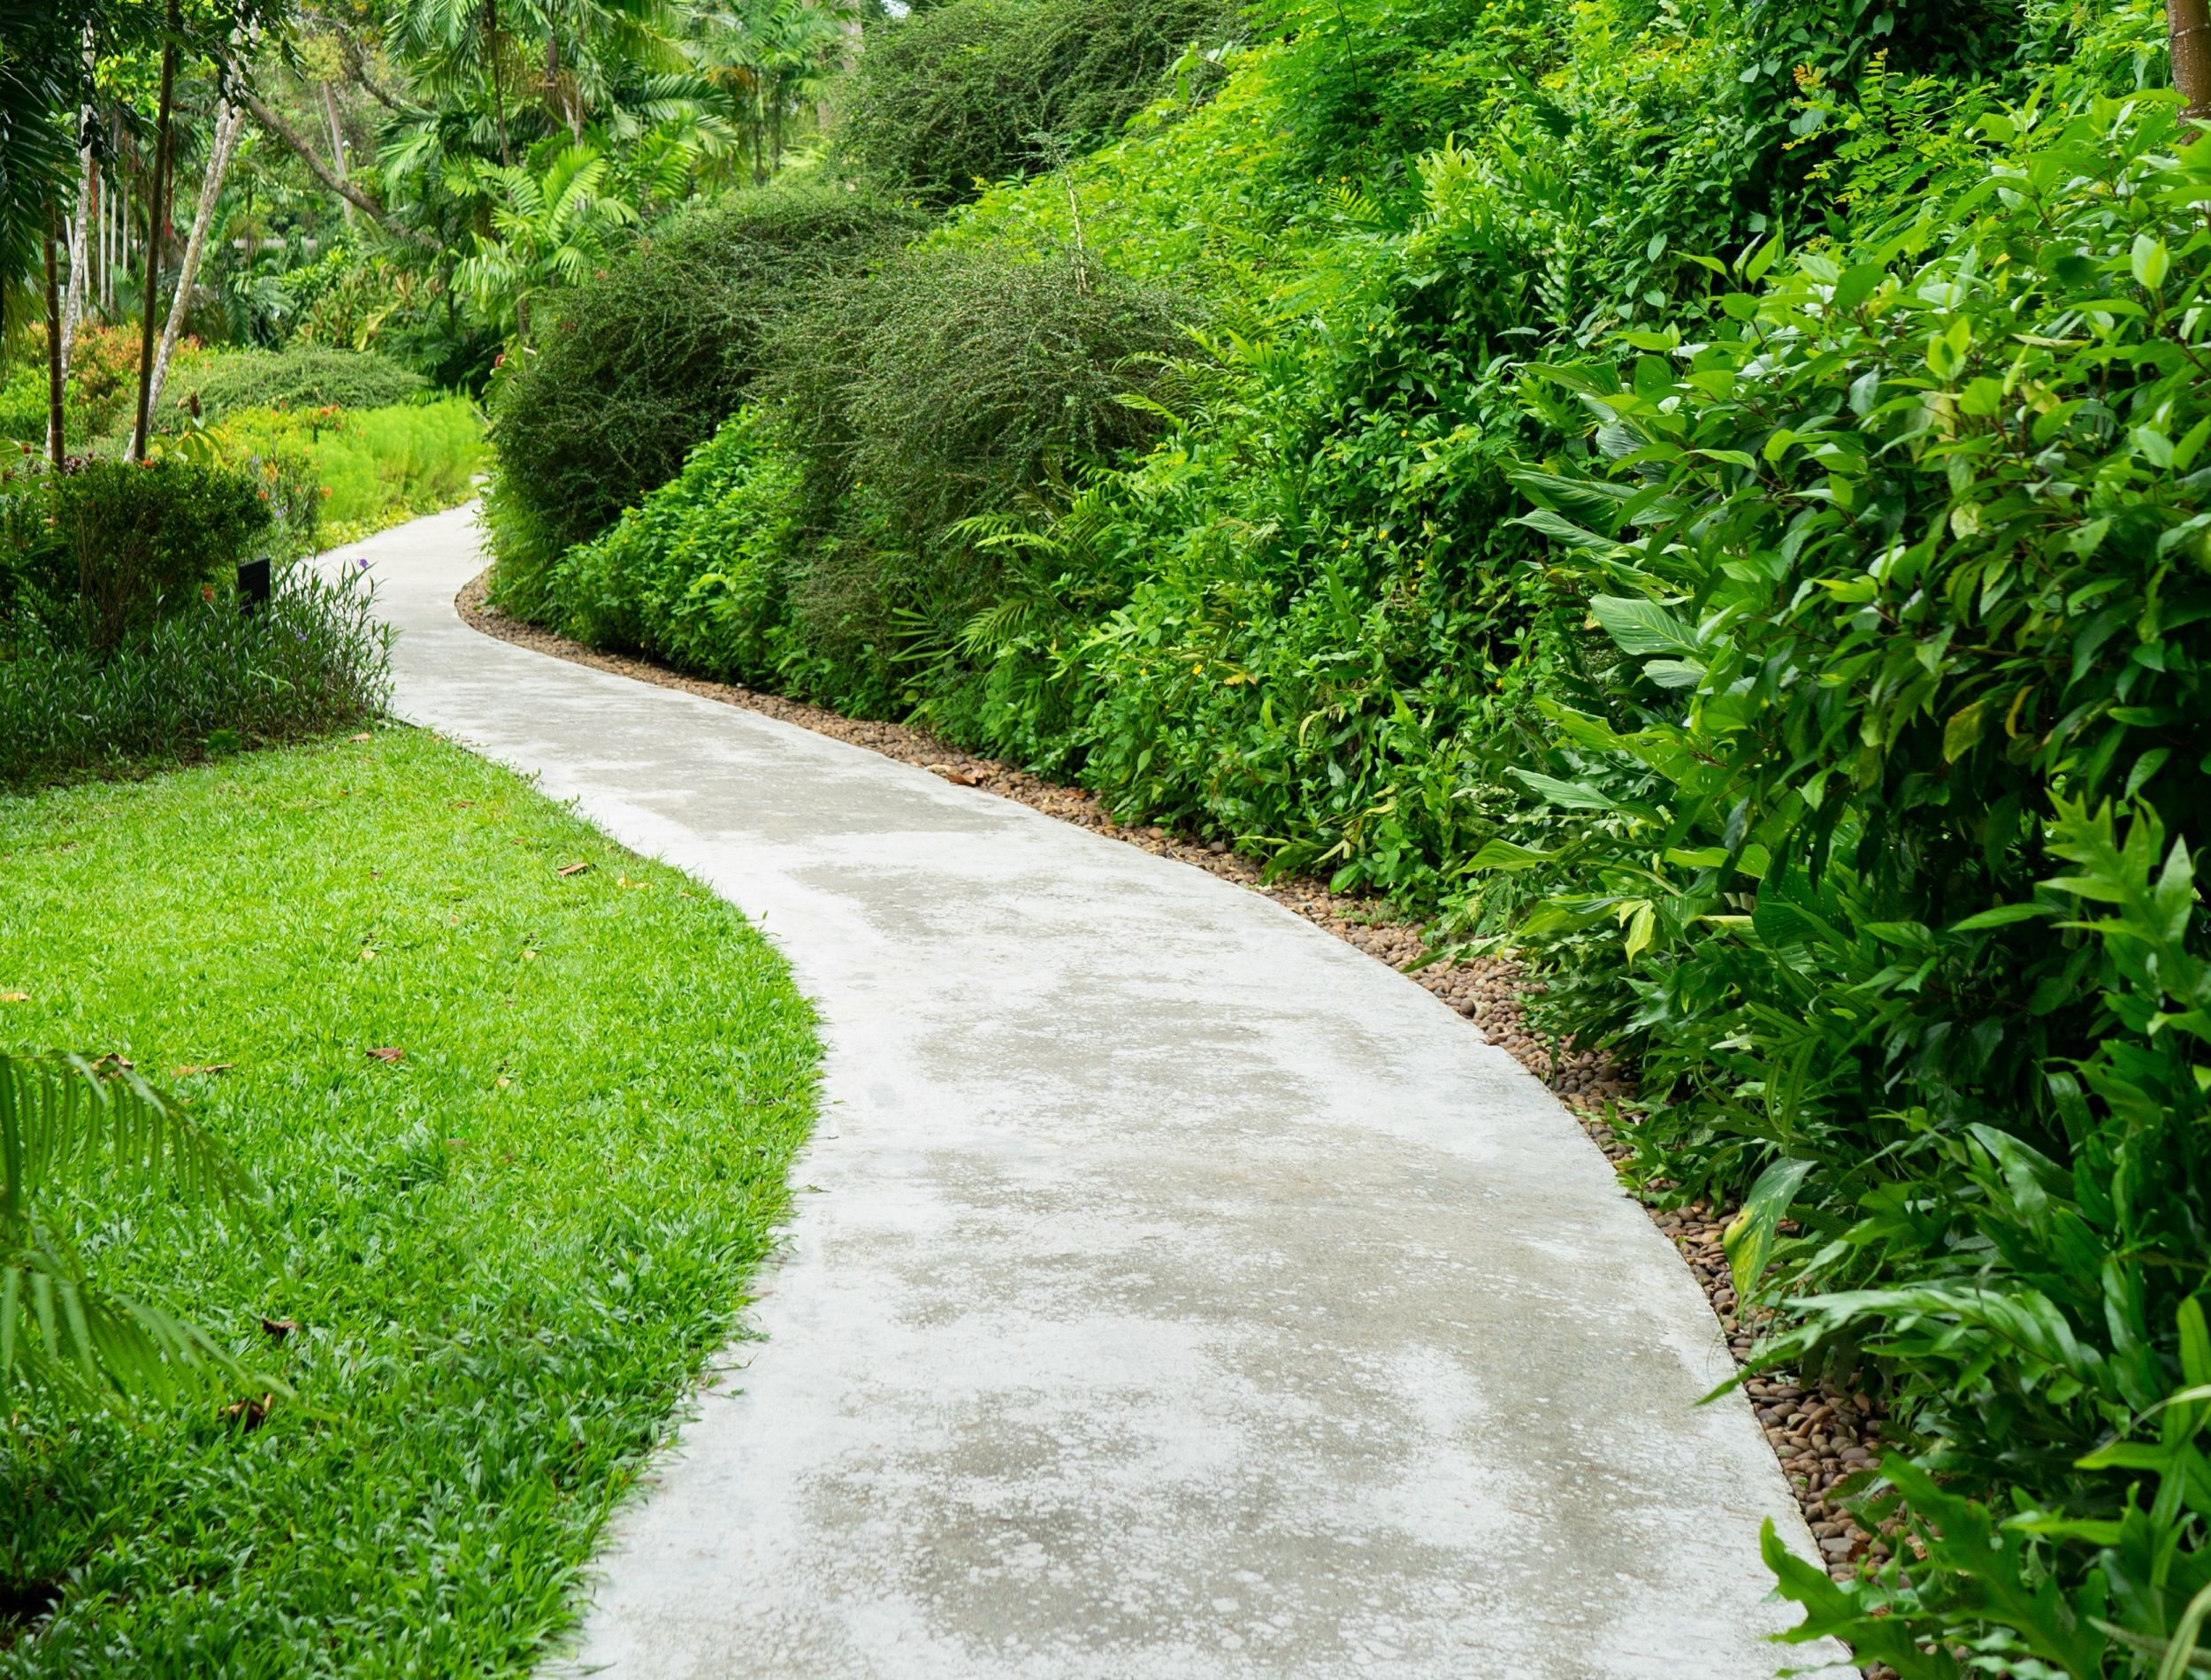 Garden path curving through grass and trees